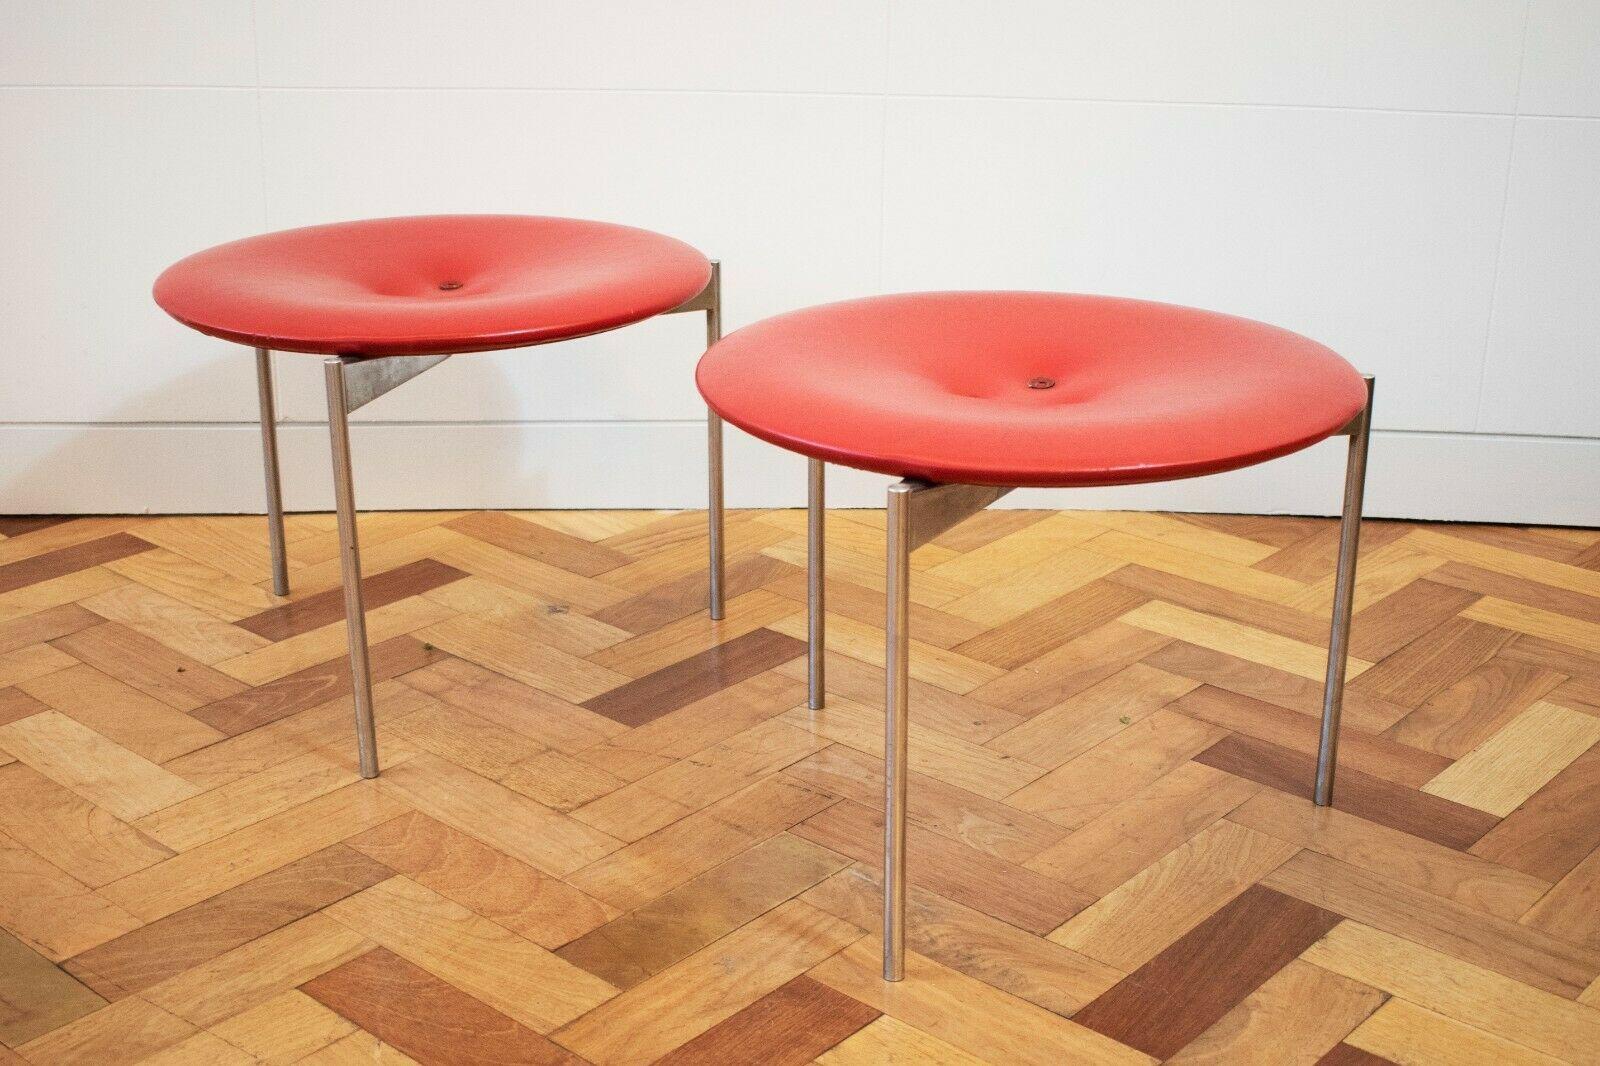 Set upon a tripod chrome metal base, the round seat is upholstered in its original red leather with button detailing, 

About the designers:
Swedish designers and brothers Uno & Östen Kristiansson, known for their lighting and mirror designs, were